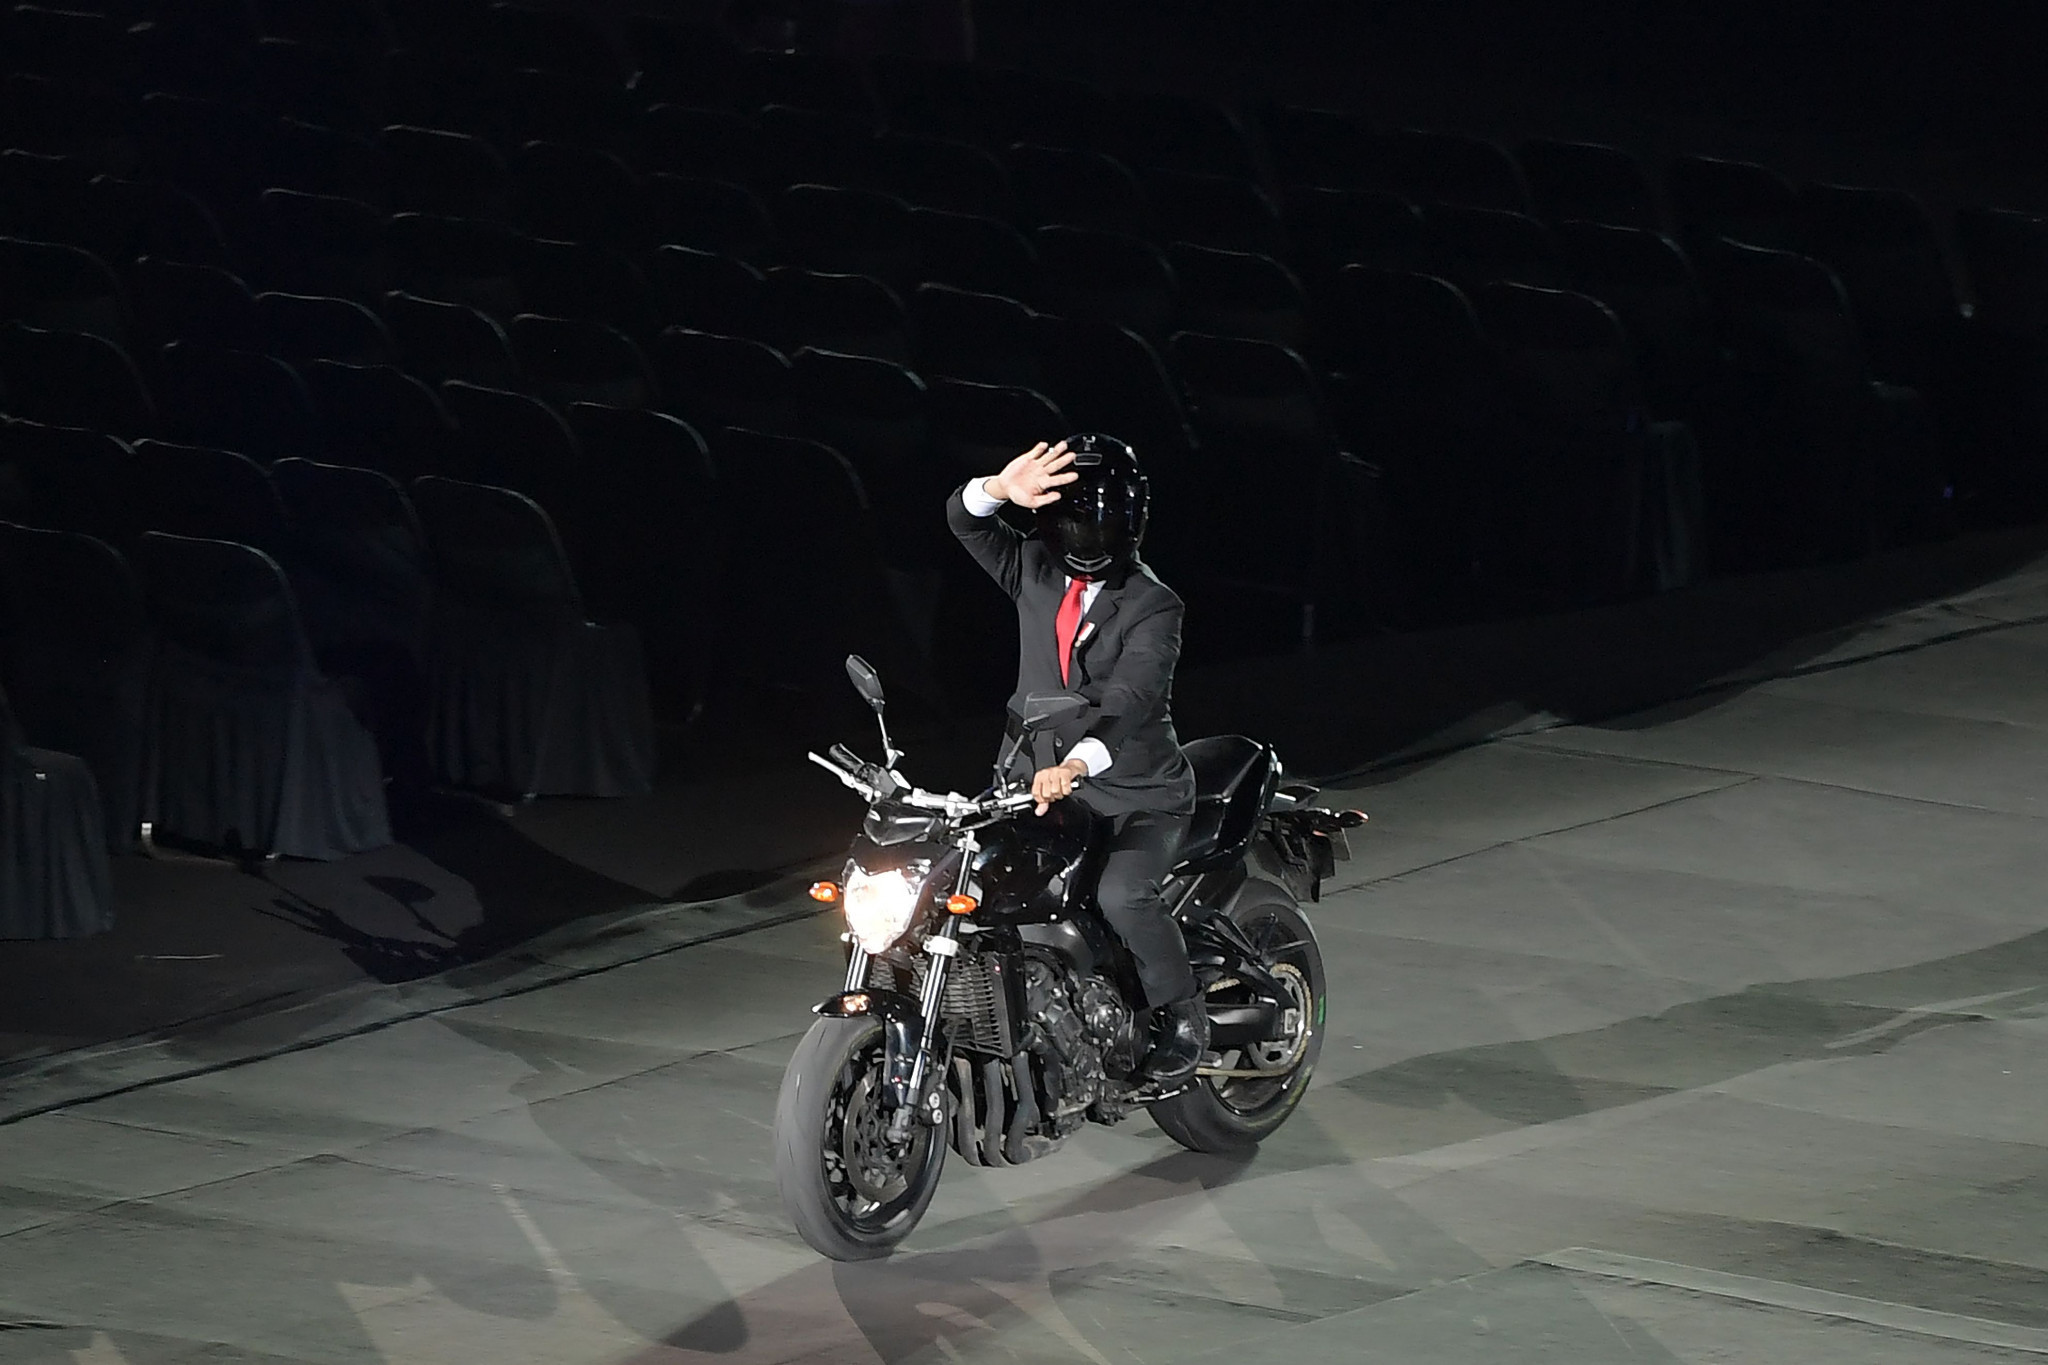 The Ceremony began with a video supposedly showing the Indonesian President Joko Widodo doing stuns on a motorbike around Jakarta, before riding triumphantly into the Gelora Bung Karno Main Stadium ©Getty Images